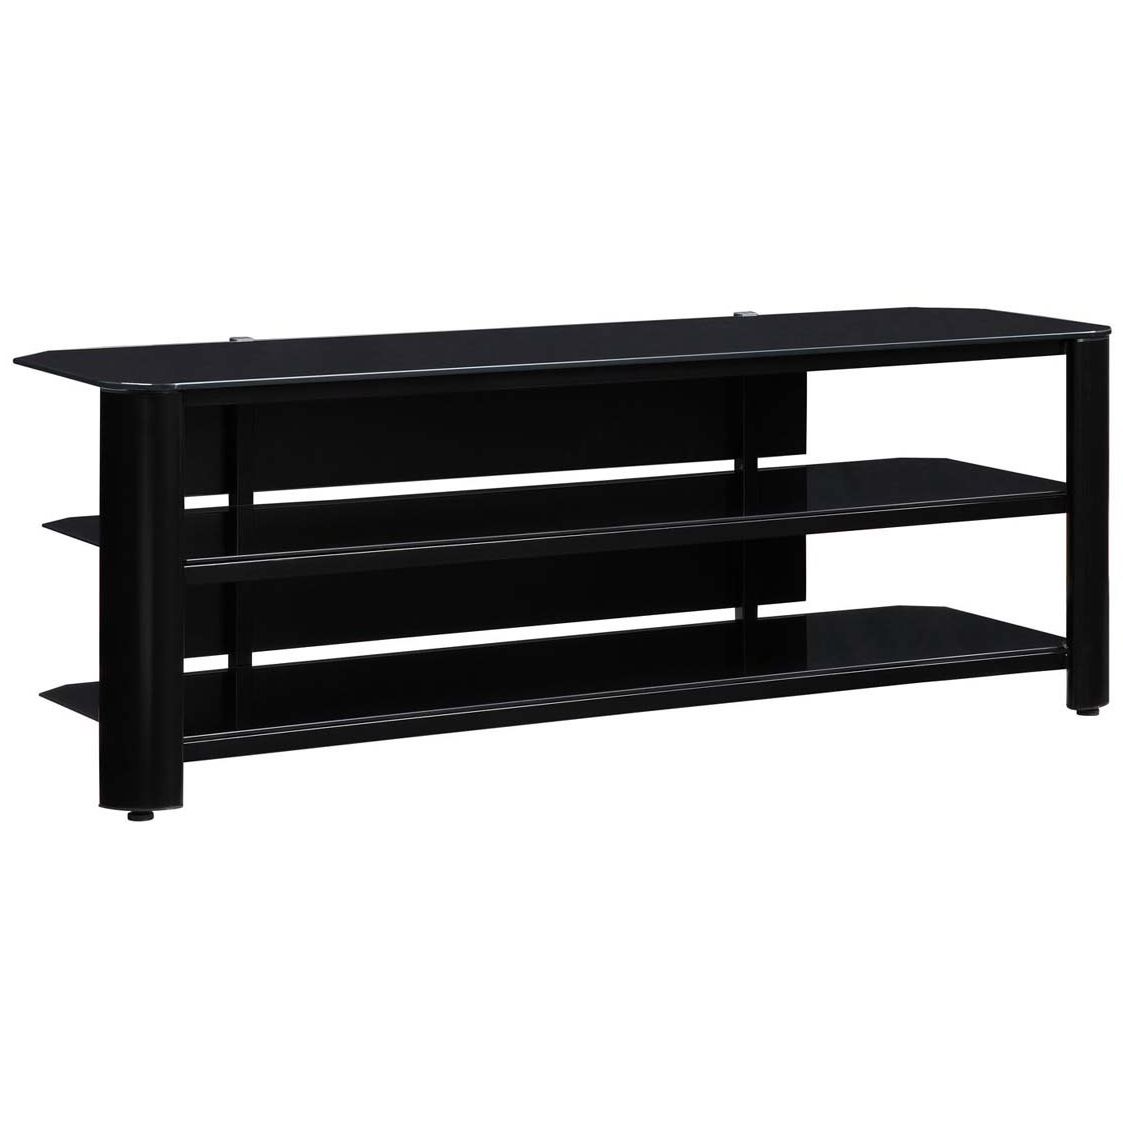 Shop Fold 'n' Snap Oxford Ez Black Innovex Tv Stand – Free Shipping Within Most Current Oxford 84 Inch Tv Stands (View 5 of 20)